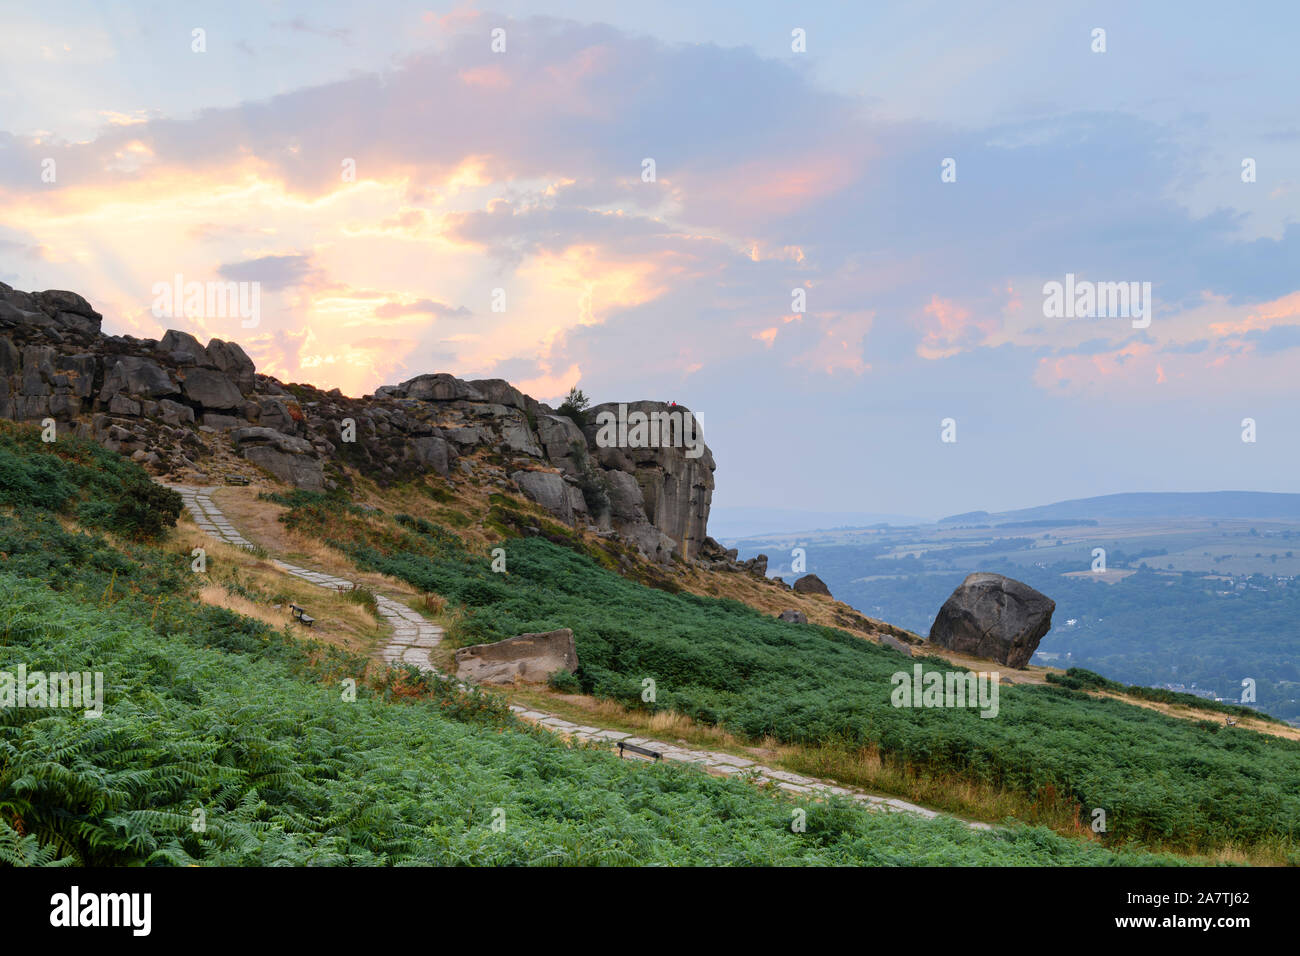 Rural scenic landscape (dramatic colourful sunset sky, sun rays, high rocky outcrop, valley) - Cow & Calf Rocks, Ilkley Moor, Yorkshire, England, UK. Stock Photo